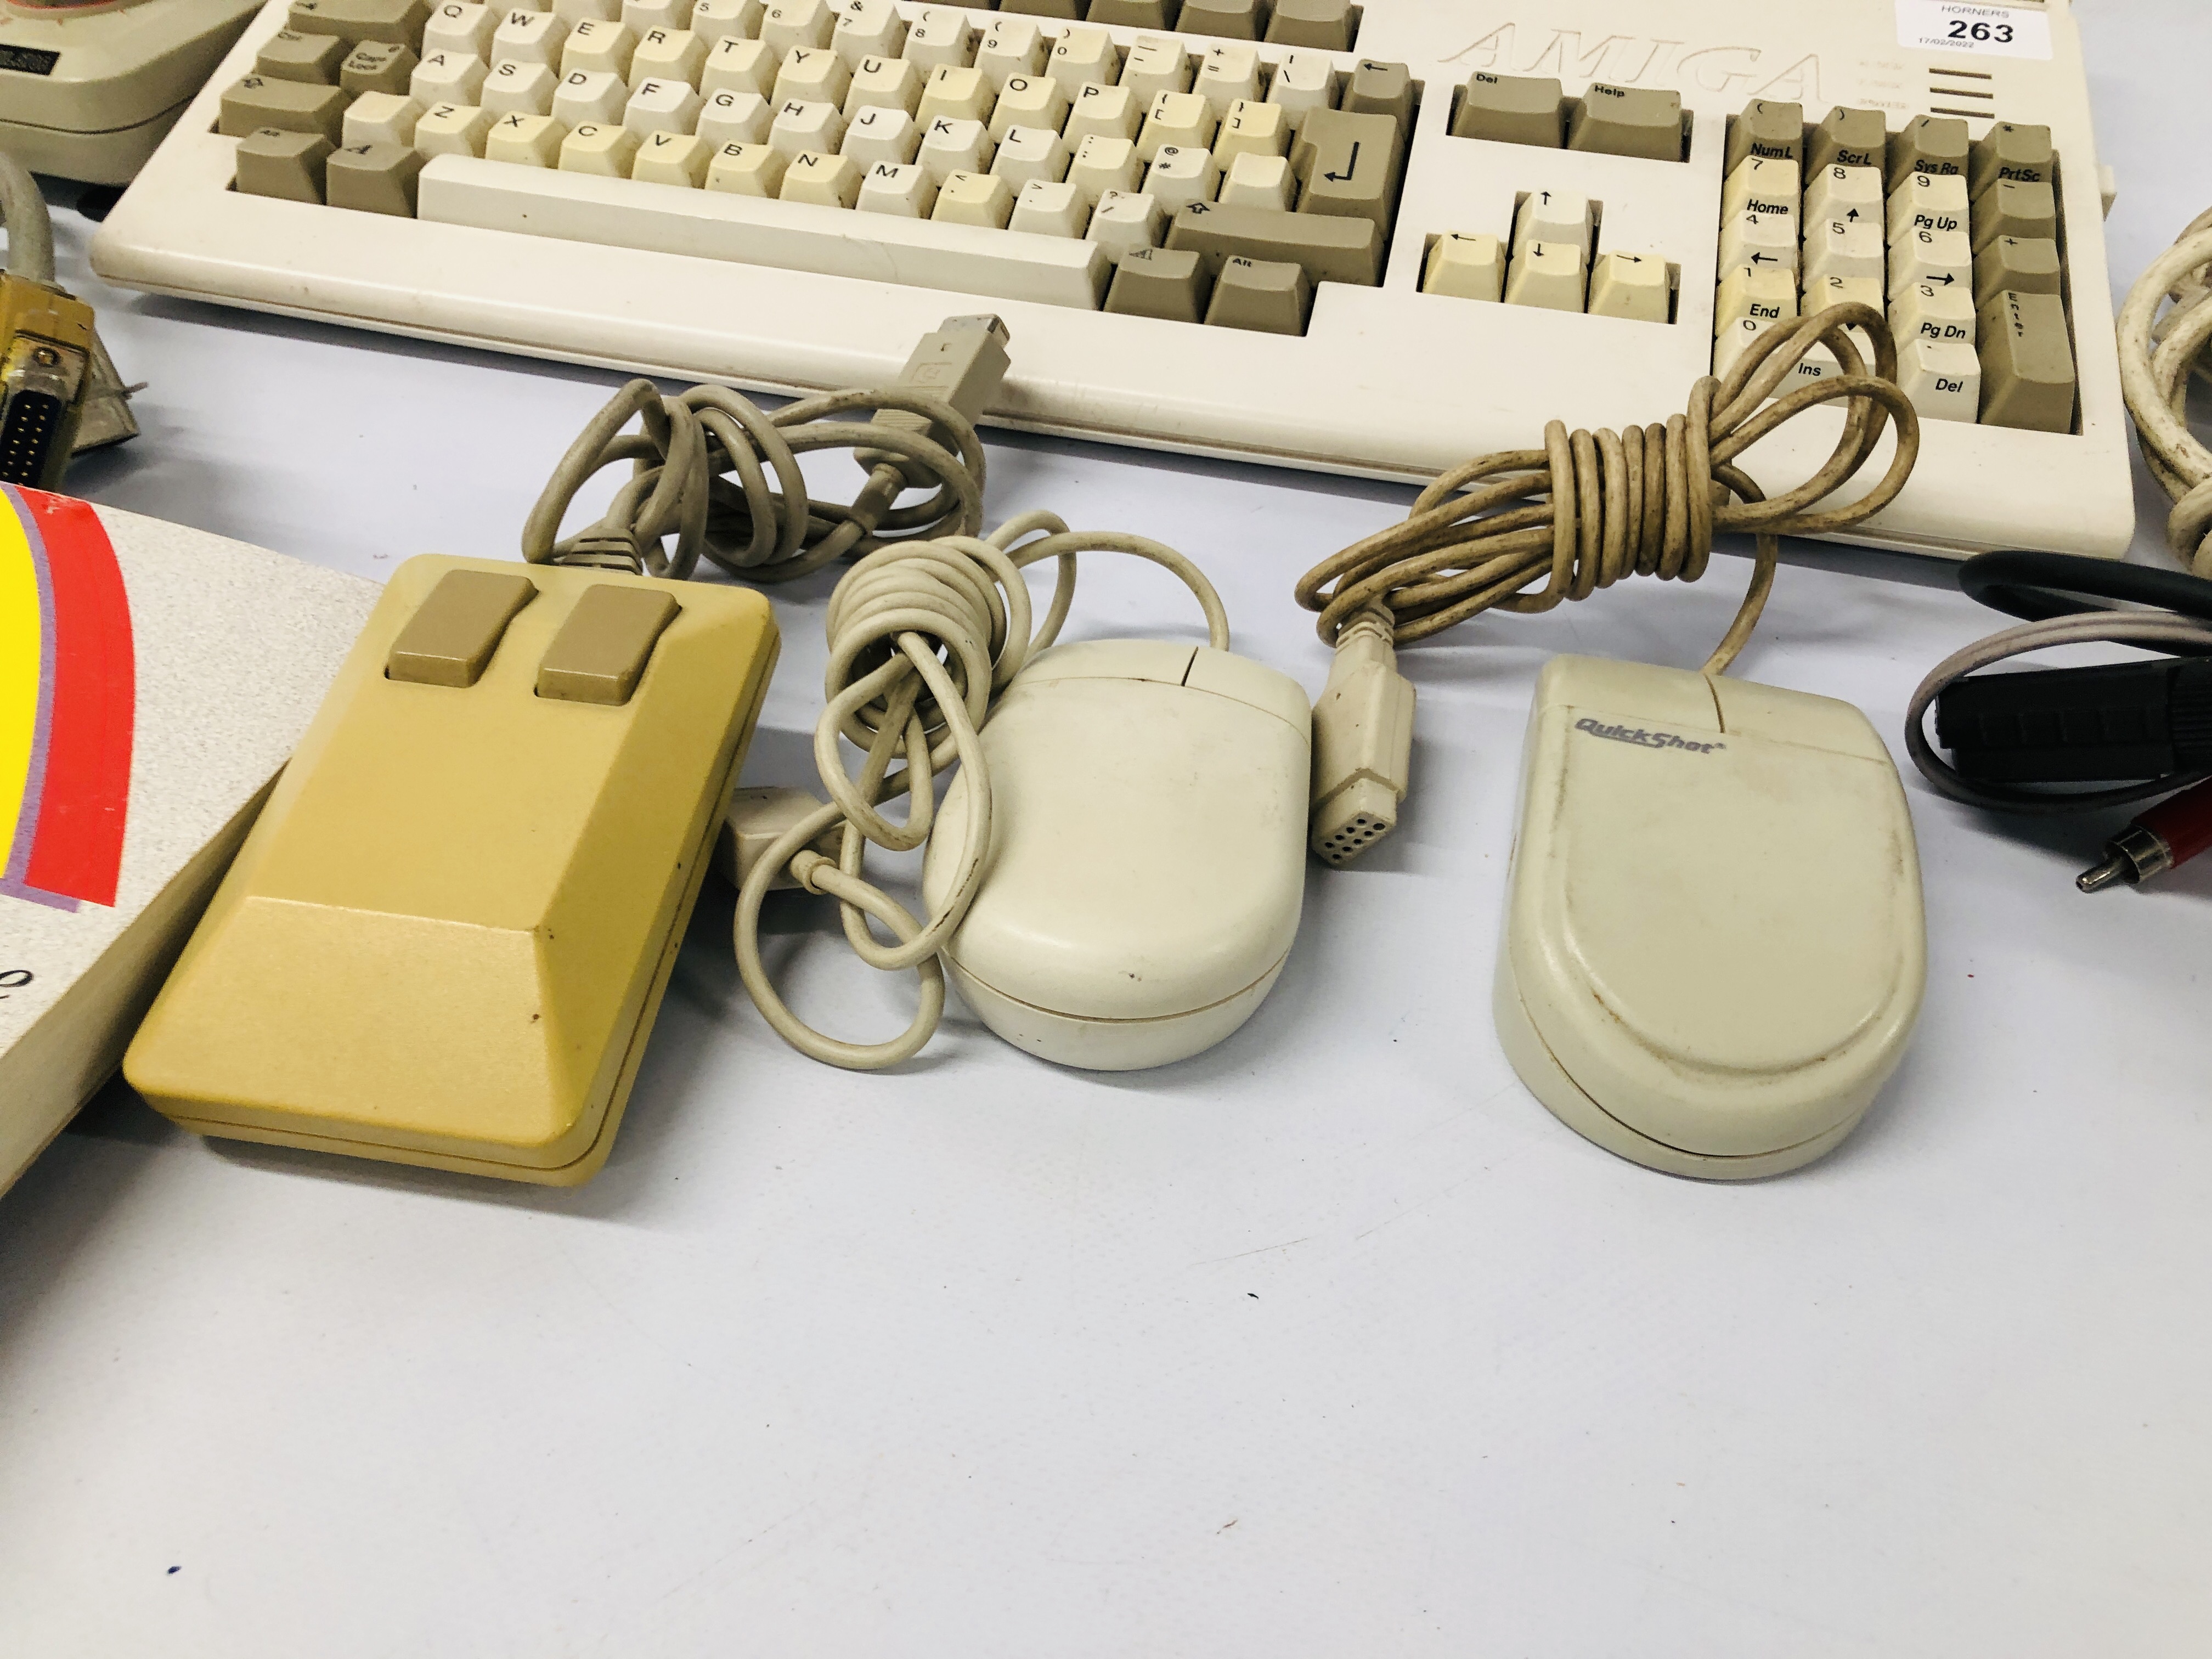 AMIGA COMMODORE A1200 CONSOLE WITH ACCESSORIES - SOLD AS SEEN - Image 2 of 7